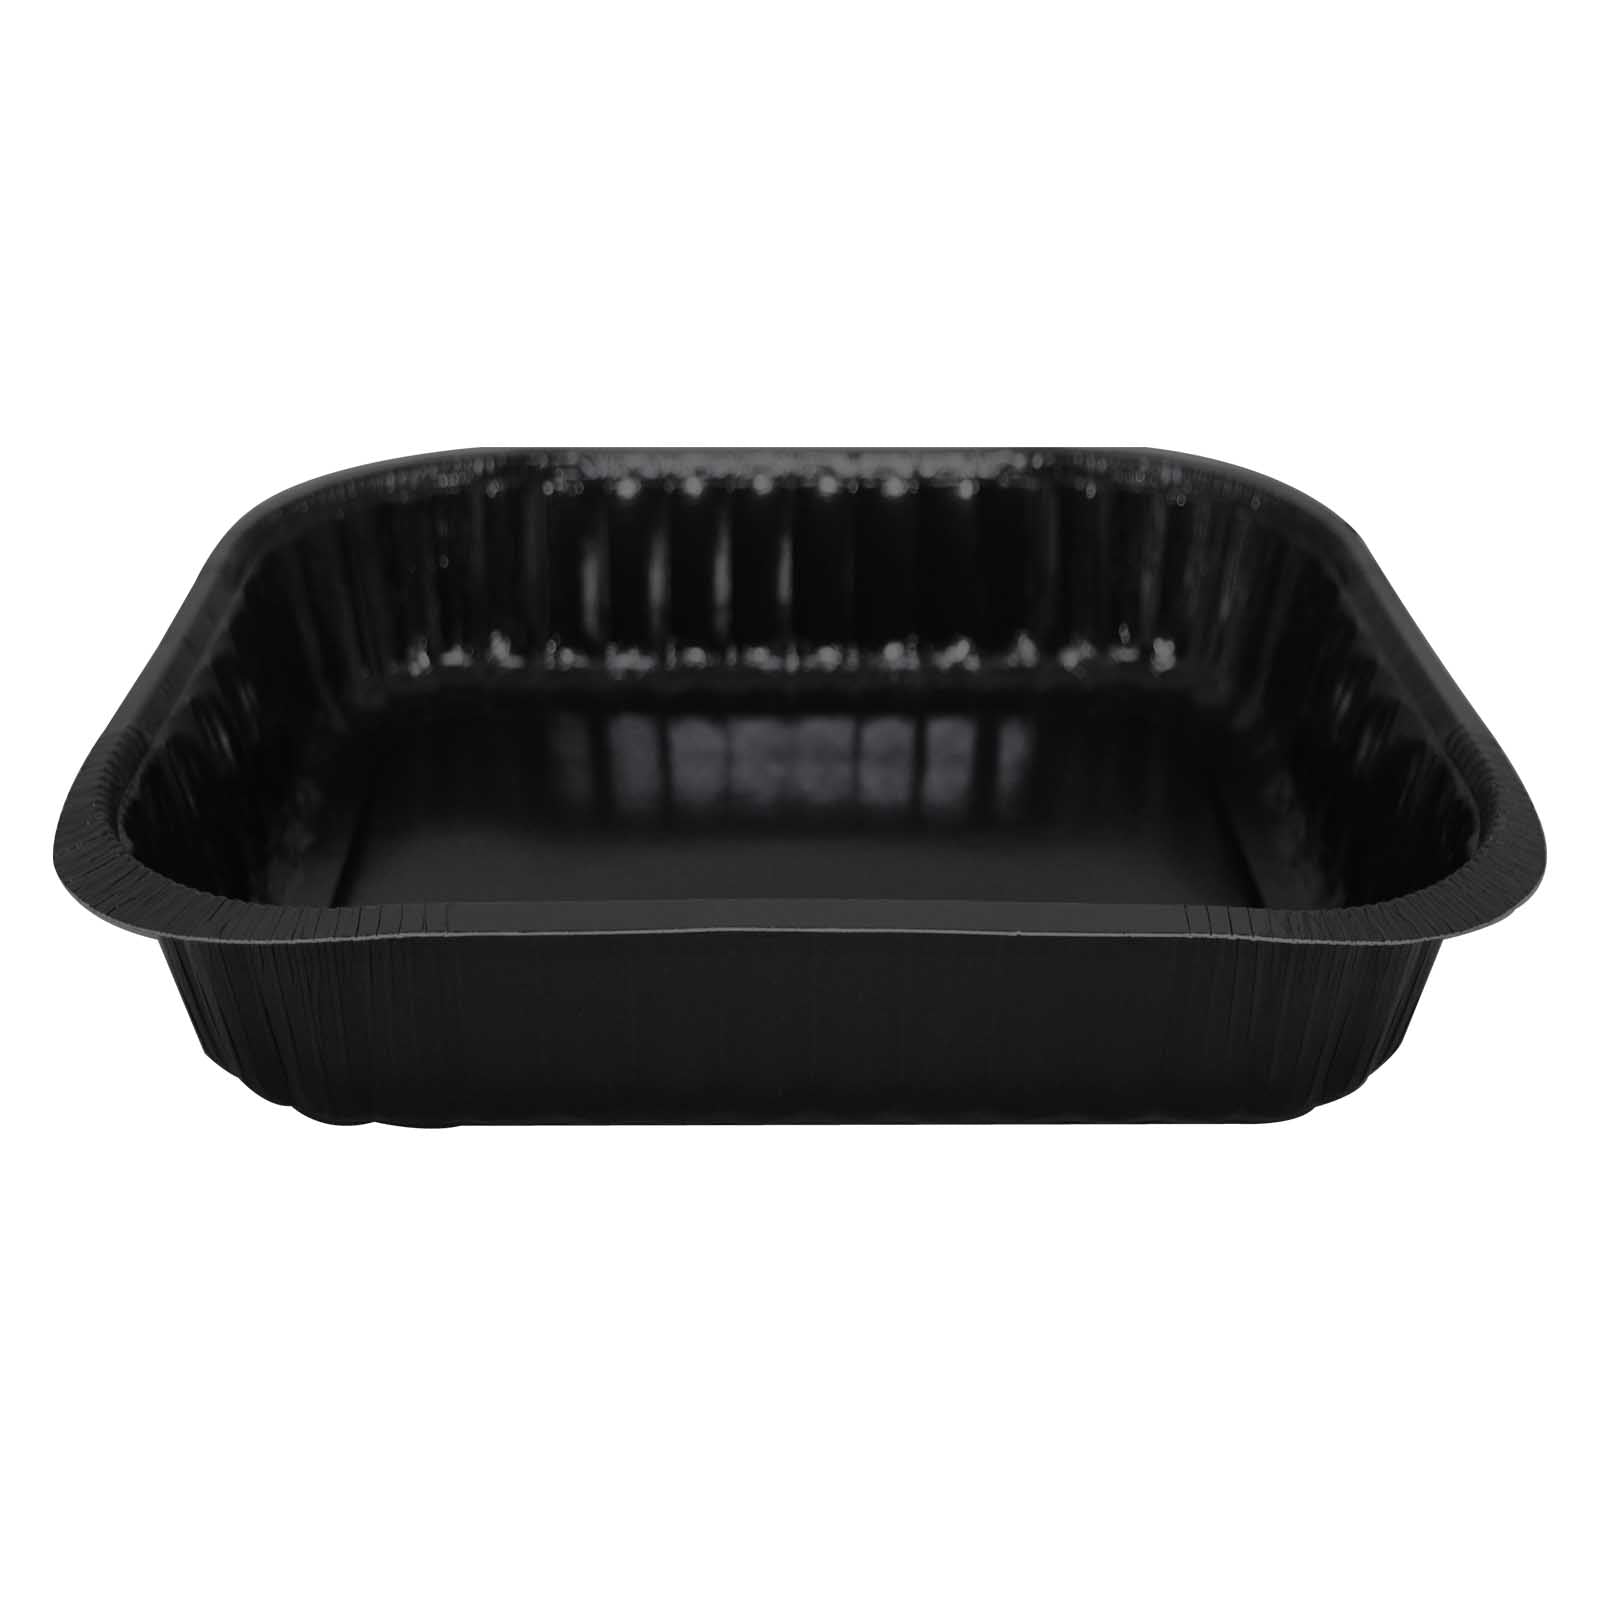 Dualpak Tray Fluted Oblong Black Small with Lid